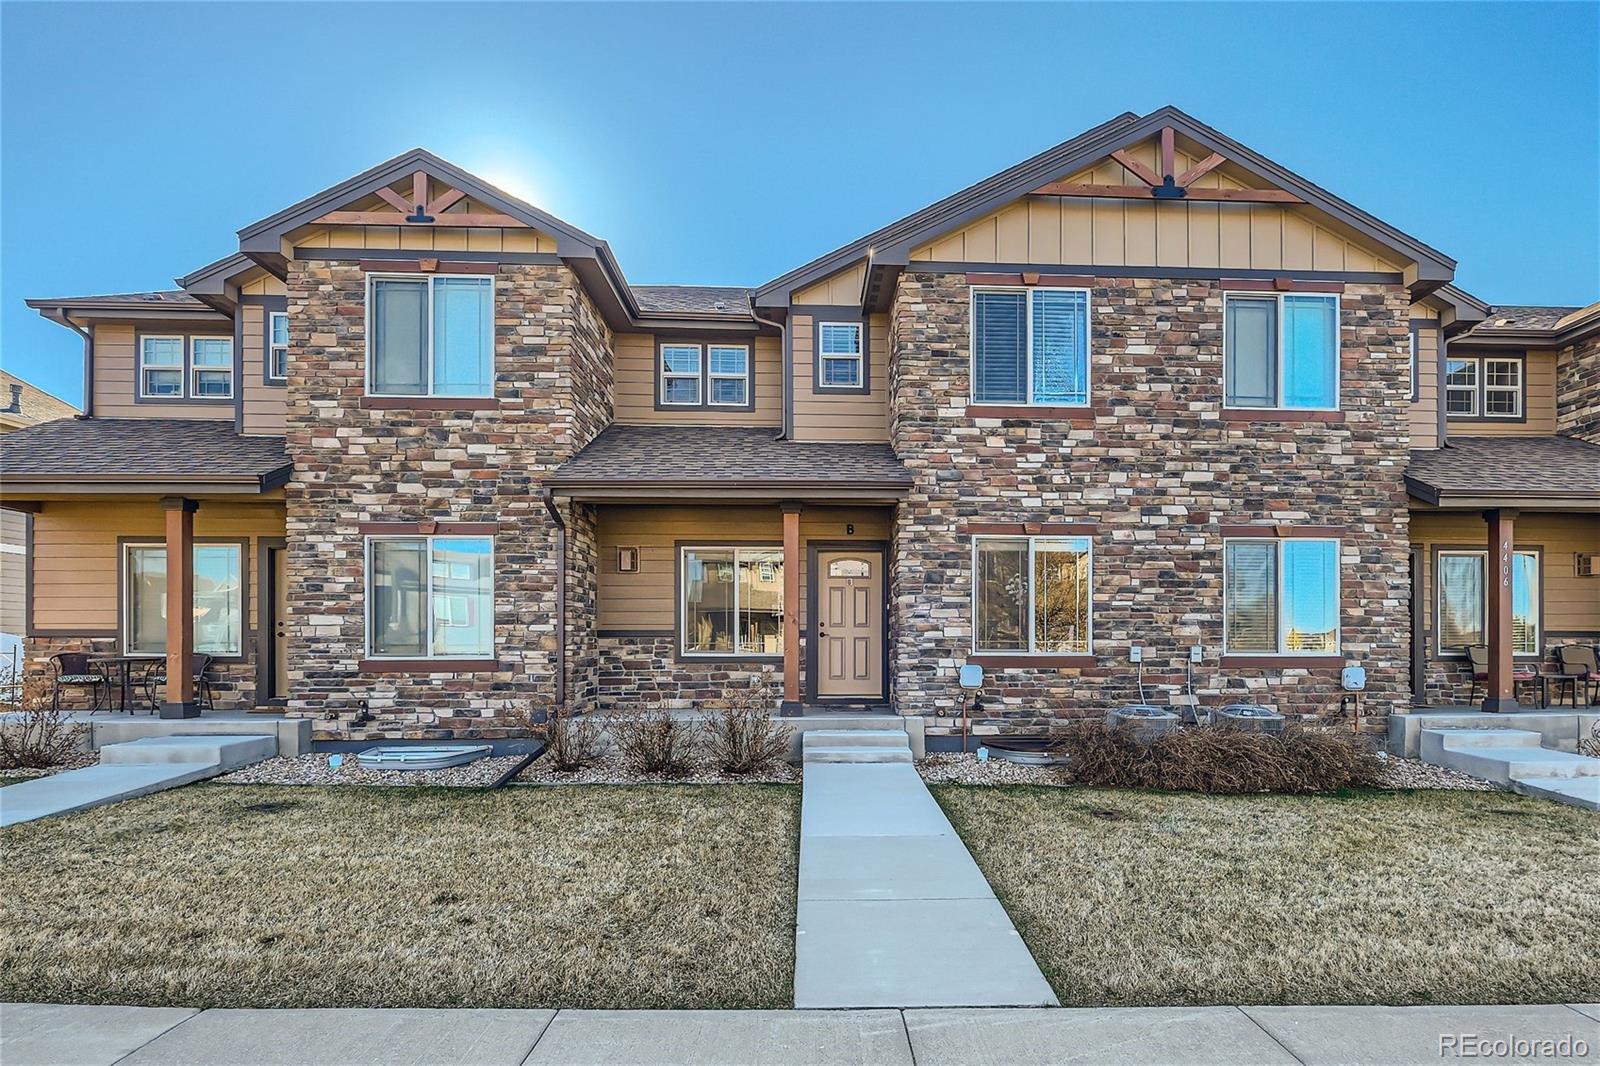 View Evans, CO 80620 townhome